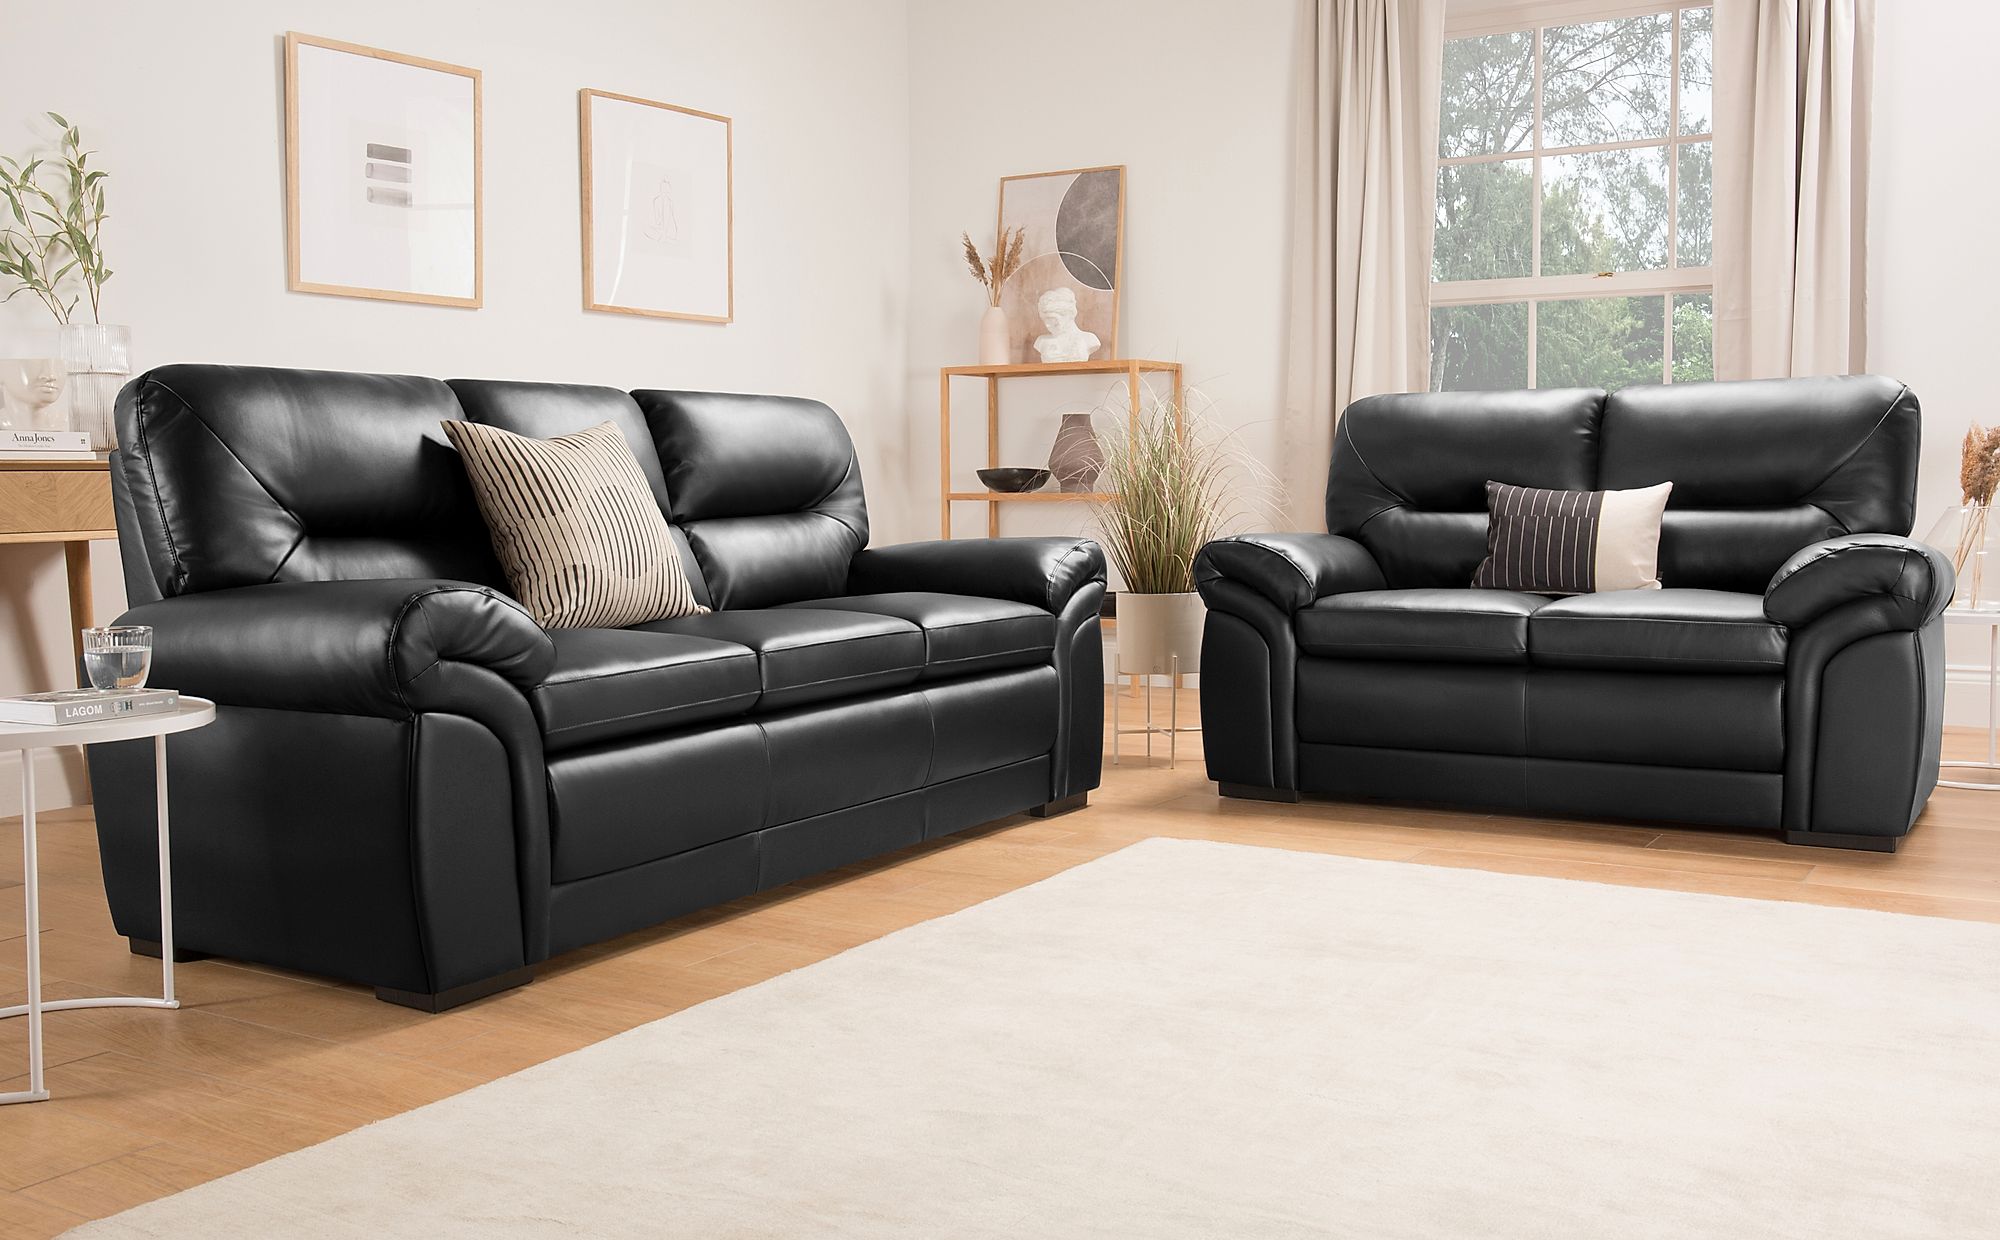 brown leather sofa set cost